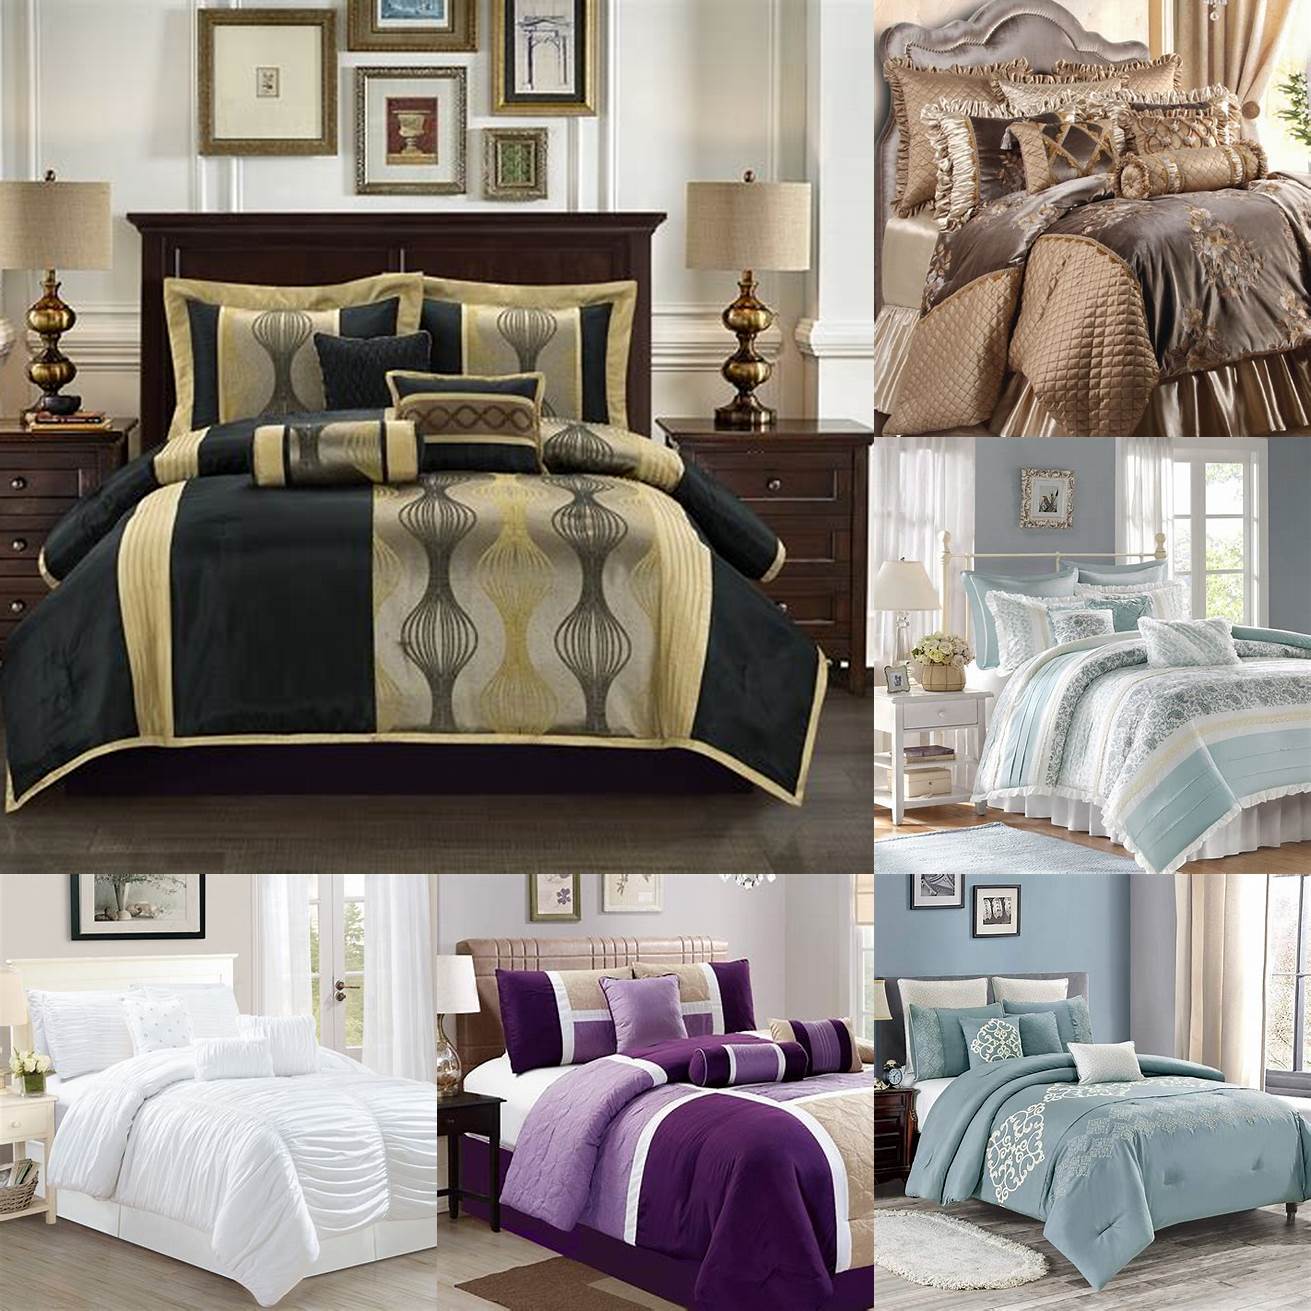 High-quality bedding and pillows